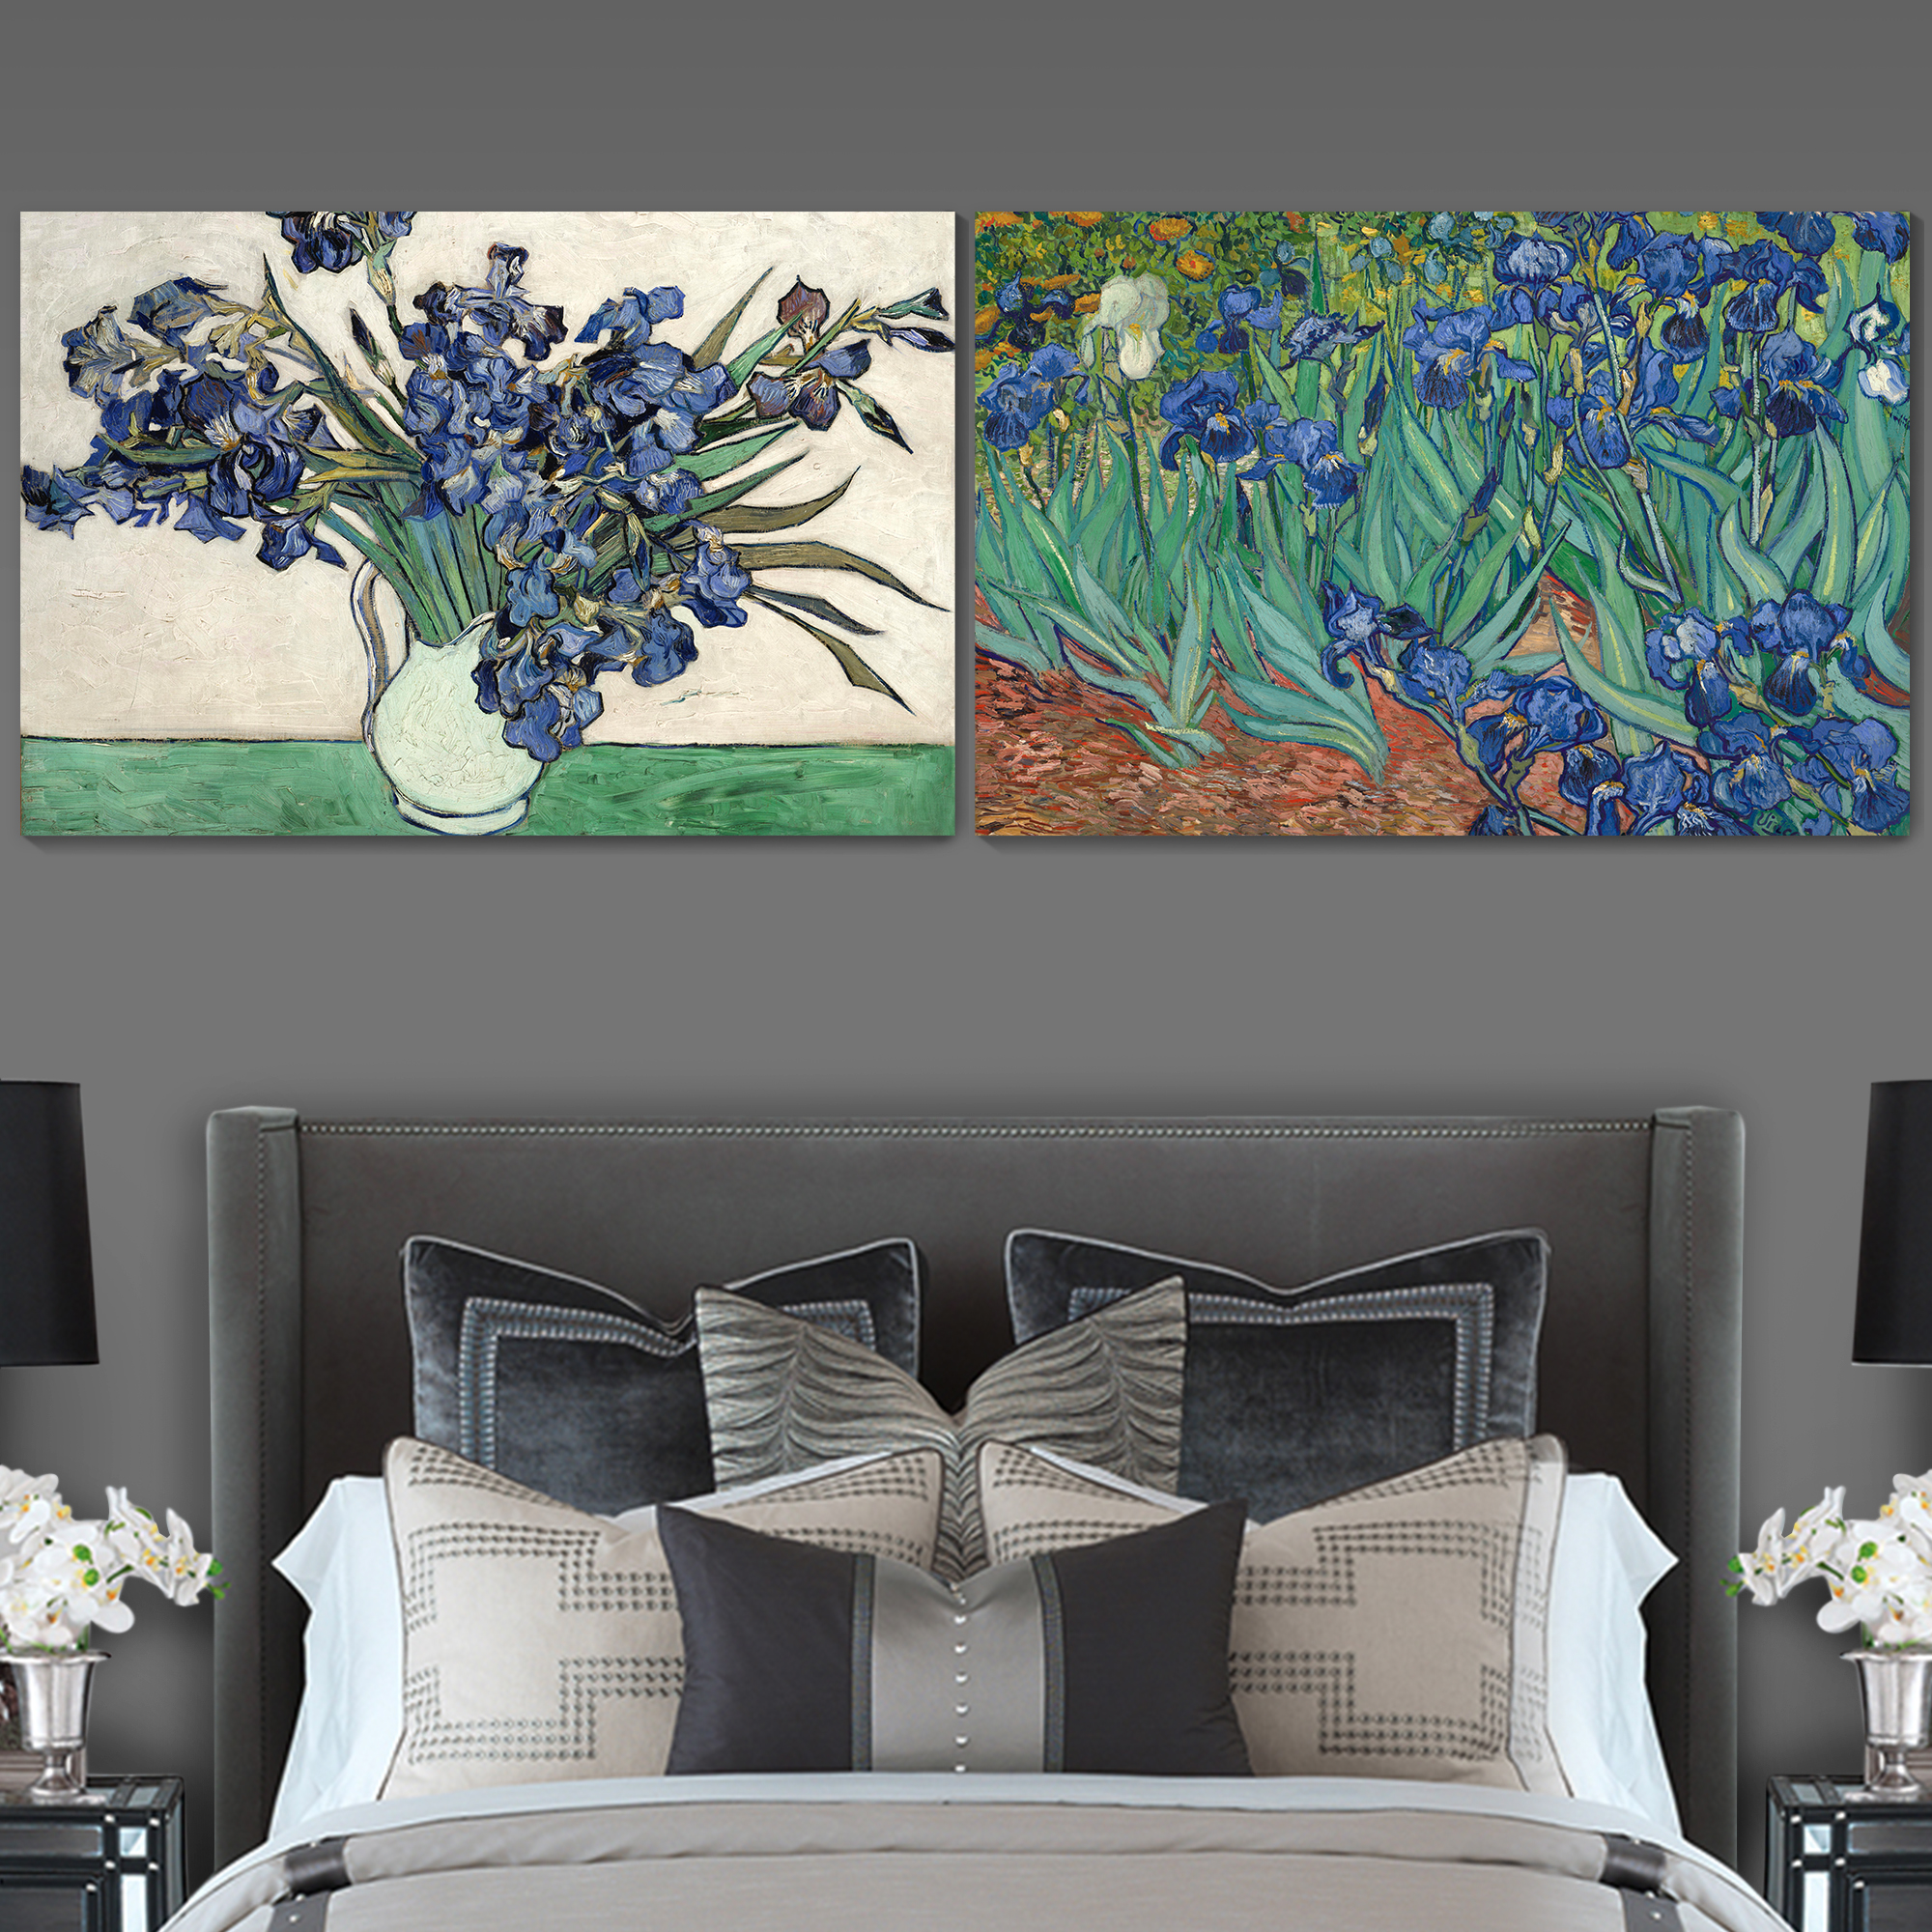 Wall26 - Irises and Roses/Irises by Vincent Van Gogh - Oil Painting Reproduction in Set of 2 | Canvas Prints Wall Art, Ready to Hang - 16